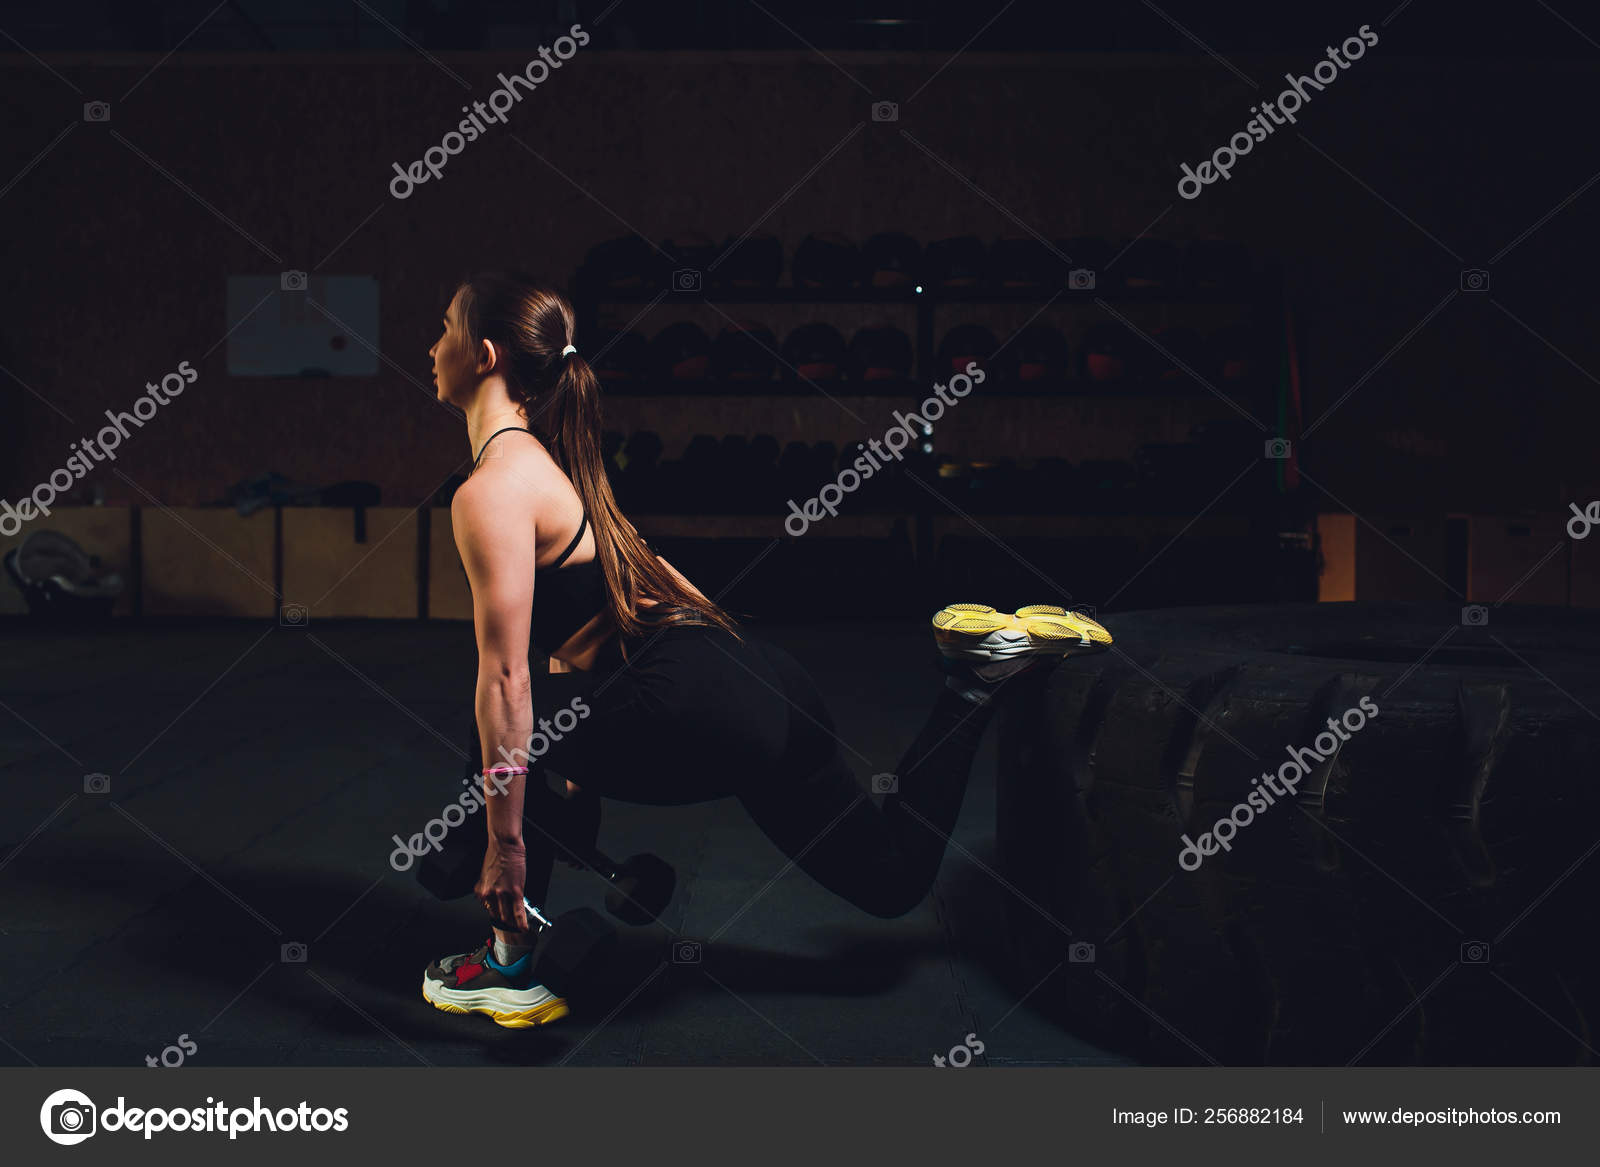 Sexy Athletic Girl Working Out In Gym. Sexy Beautiful Butt In Thong. Fitness  Woman Doing Exercise. Stock Photo, Picture and Royalty Free Image. Image  79933050.